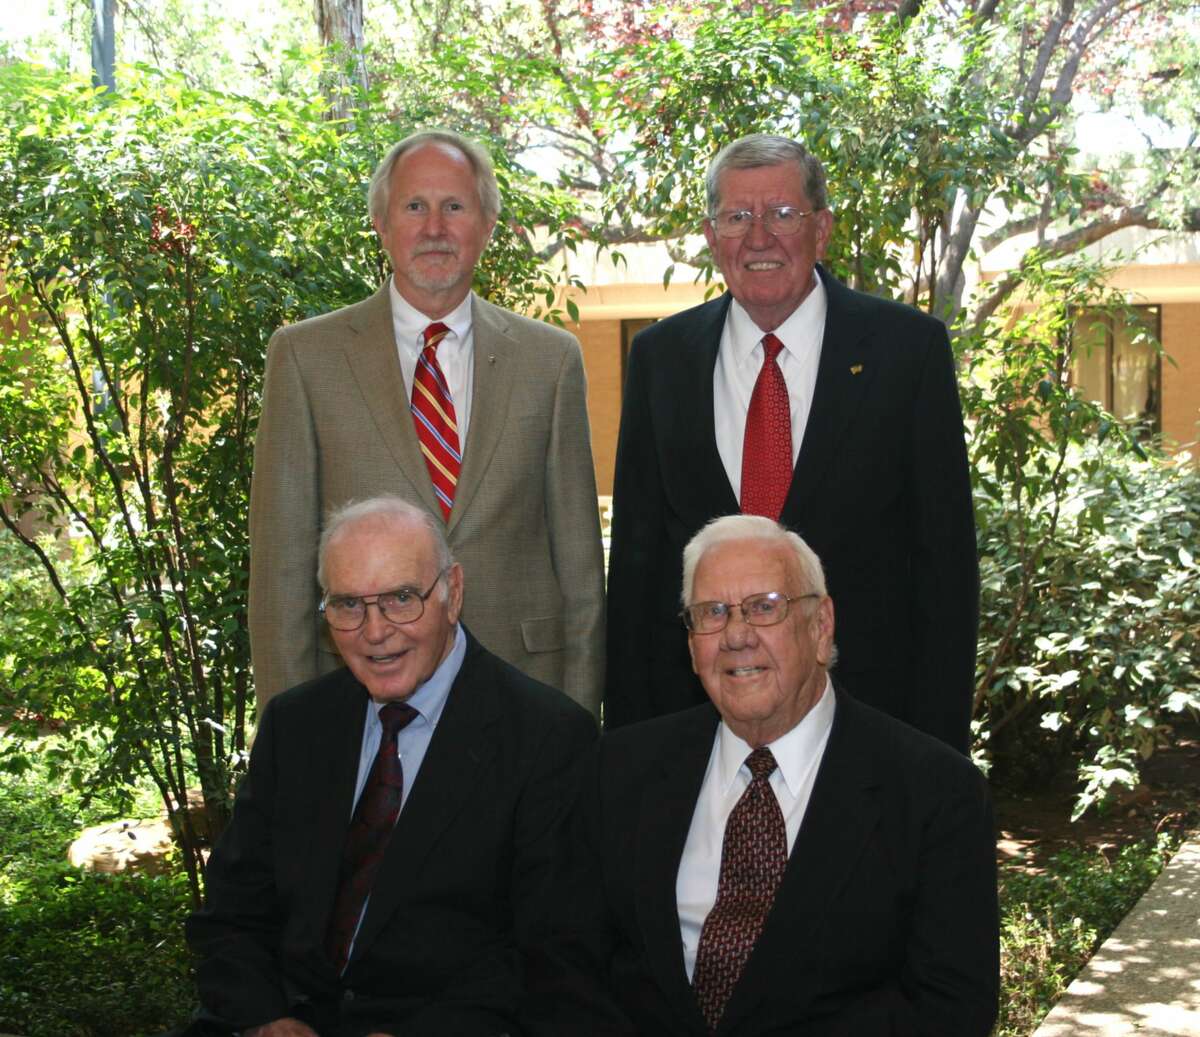 Former MC President David Daniel, back right, is seen with the current president, Steve Thomas, back left, and former presidents Al Langford, front left, and Jess Parrish.